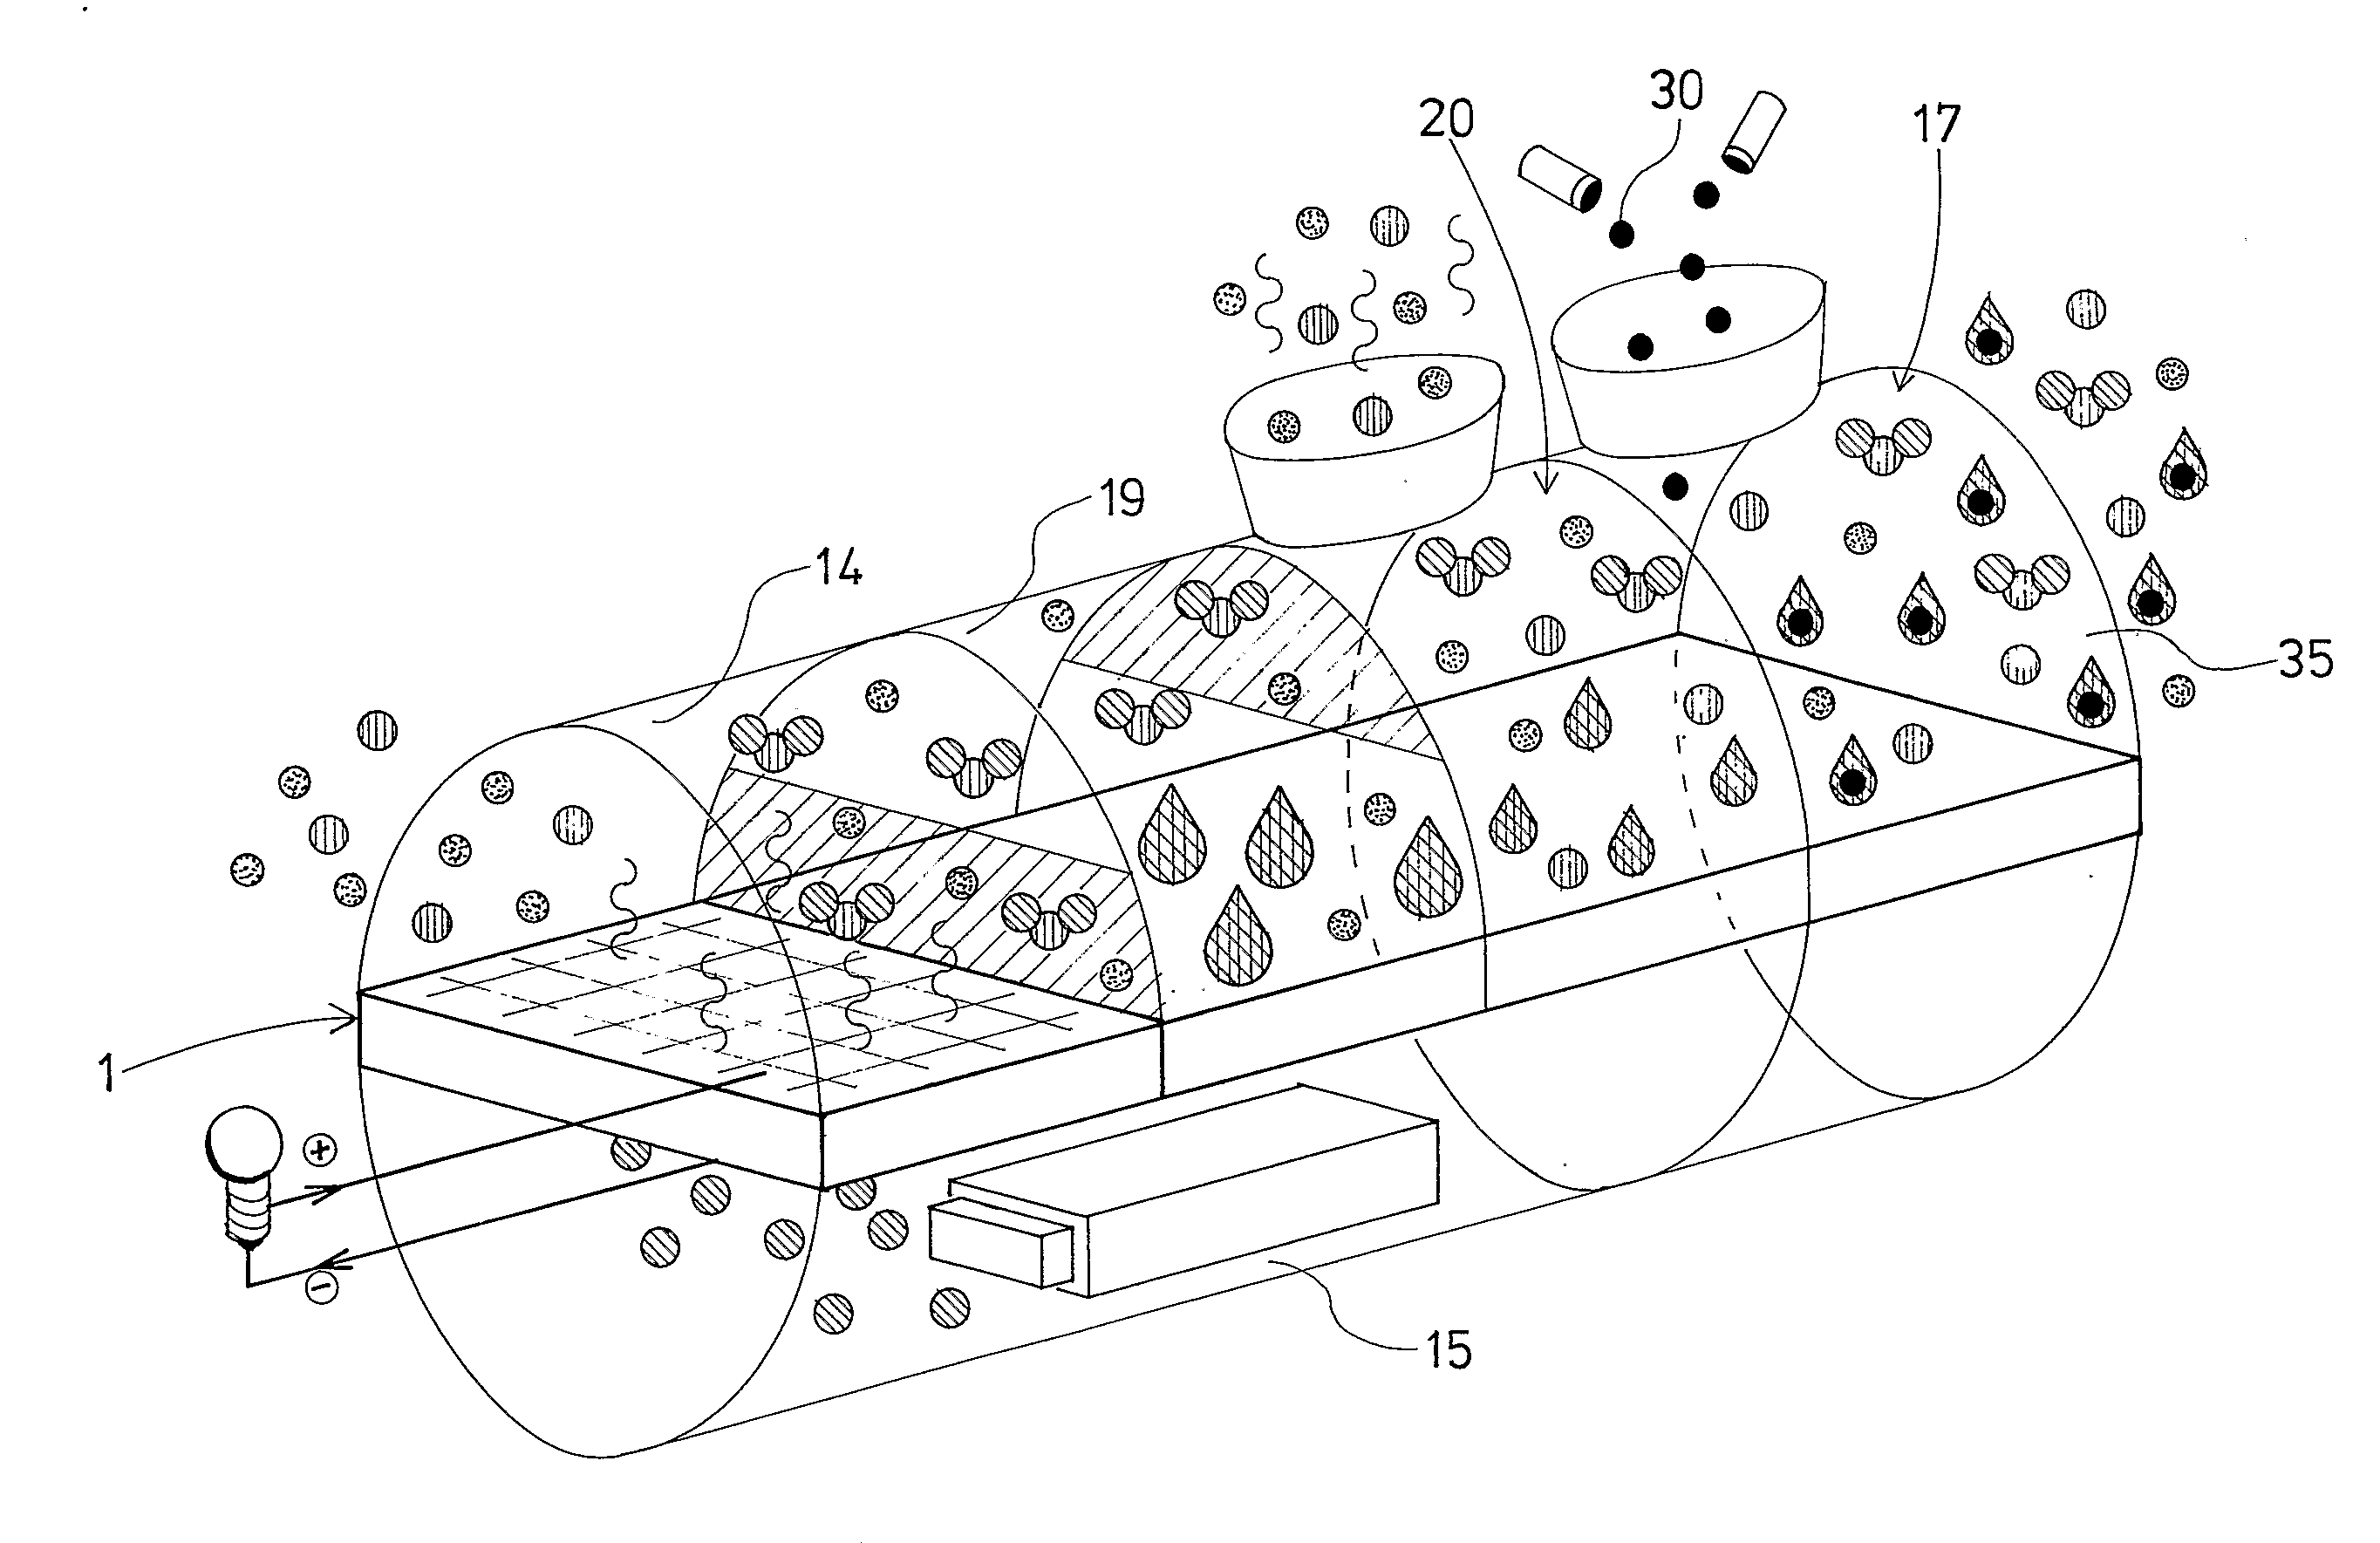 Device and Method For Administration of a Substance to a Mammal by Means of Inhalation